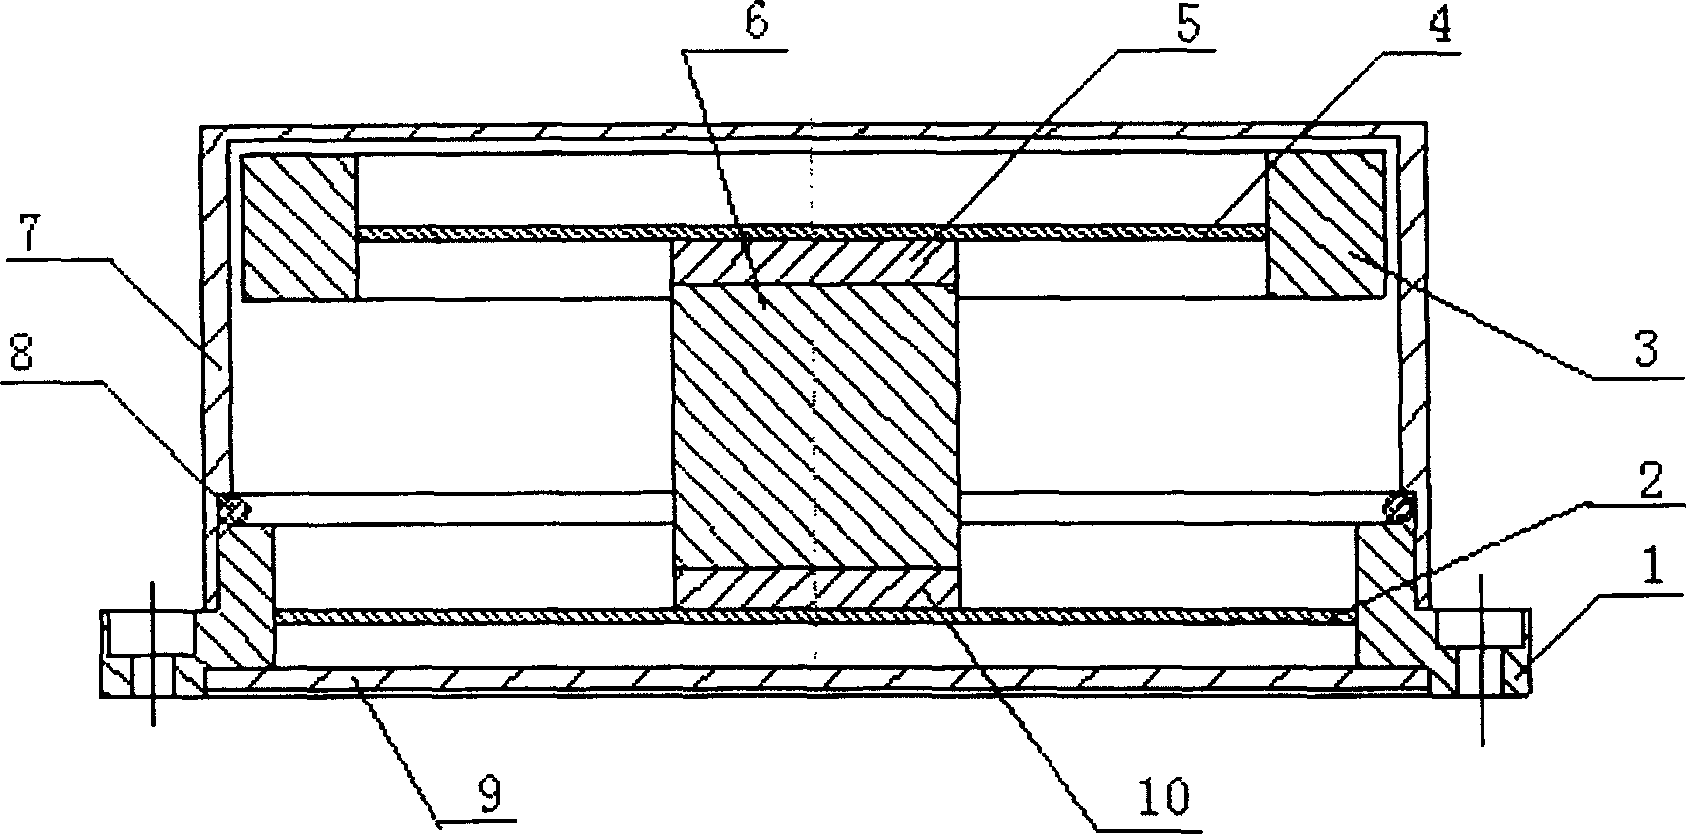 Six-axle acceleration sensor with dual E-shaped circular membranes and cross beam structure